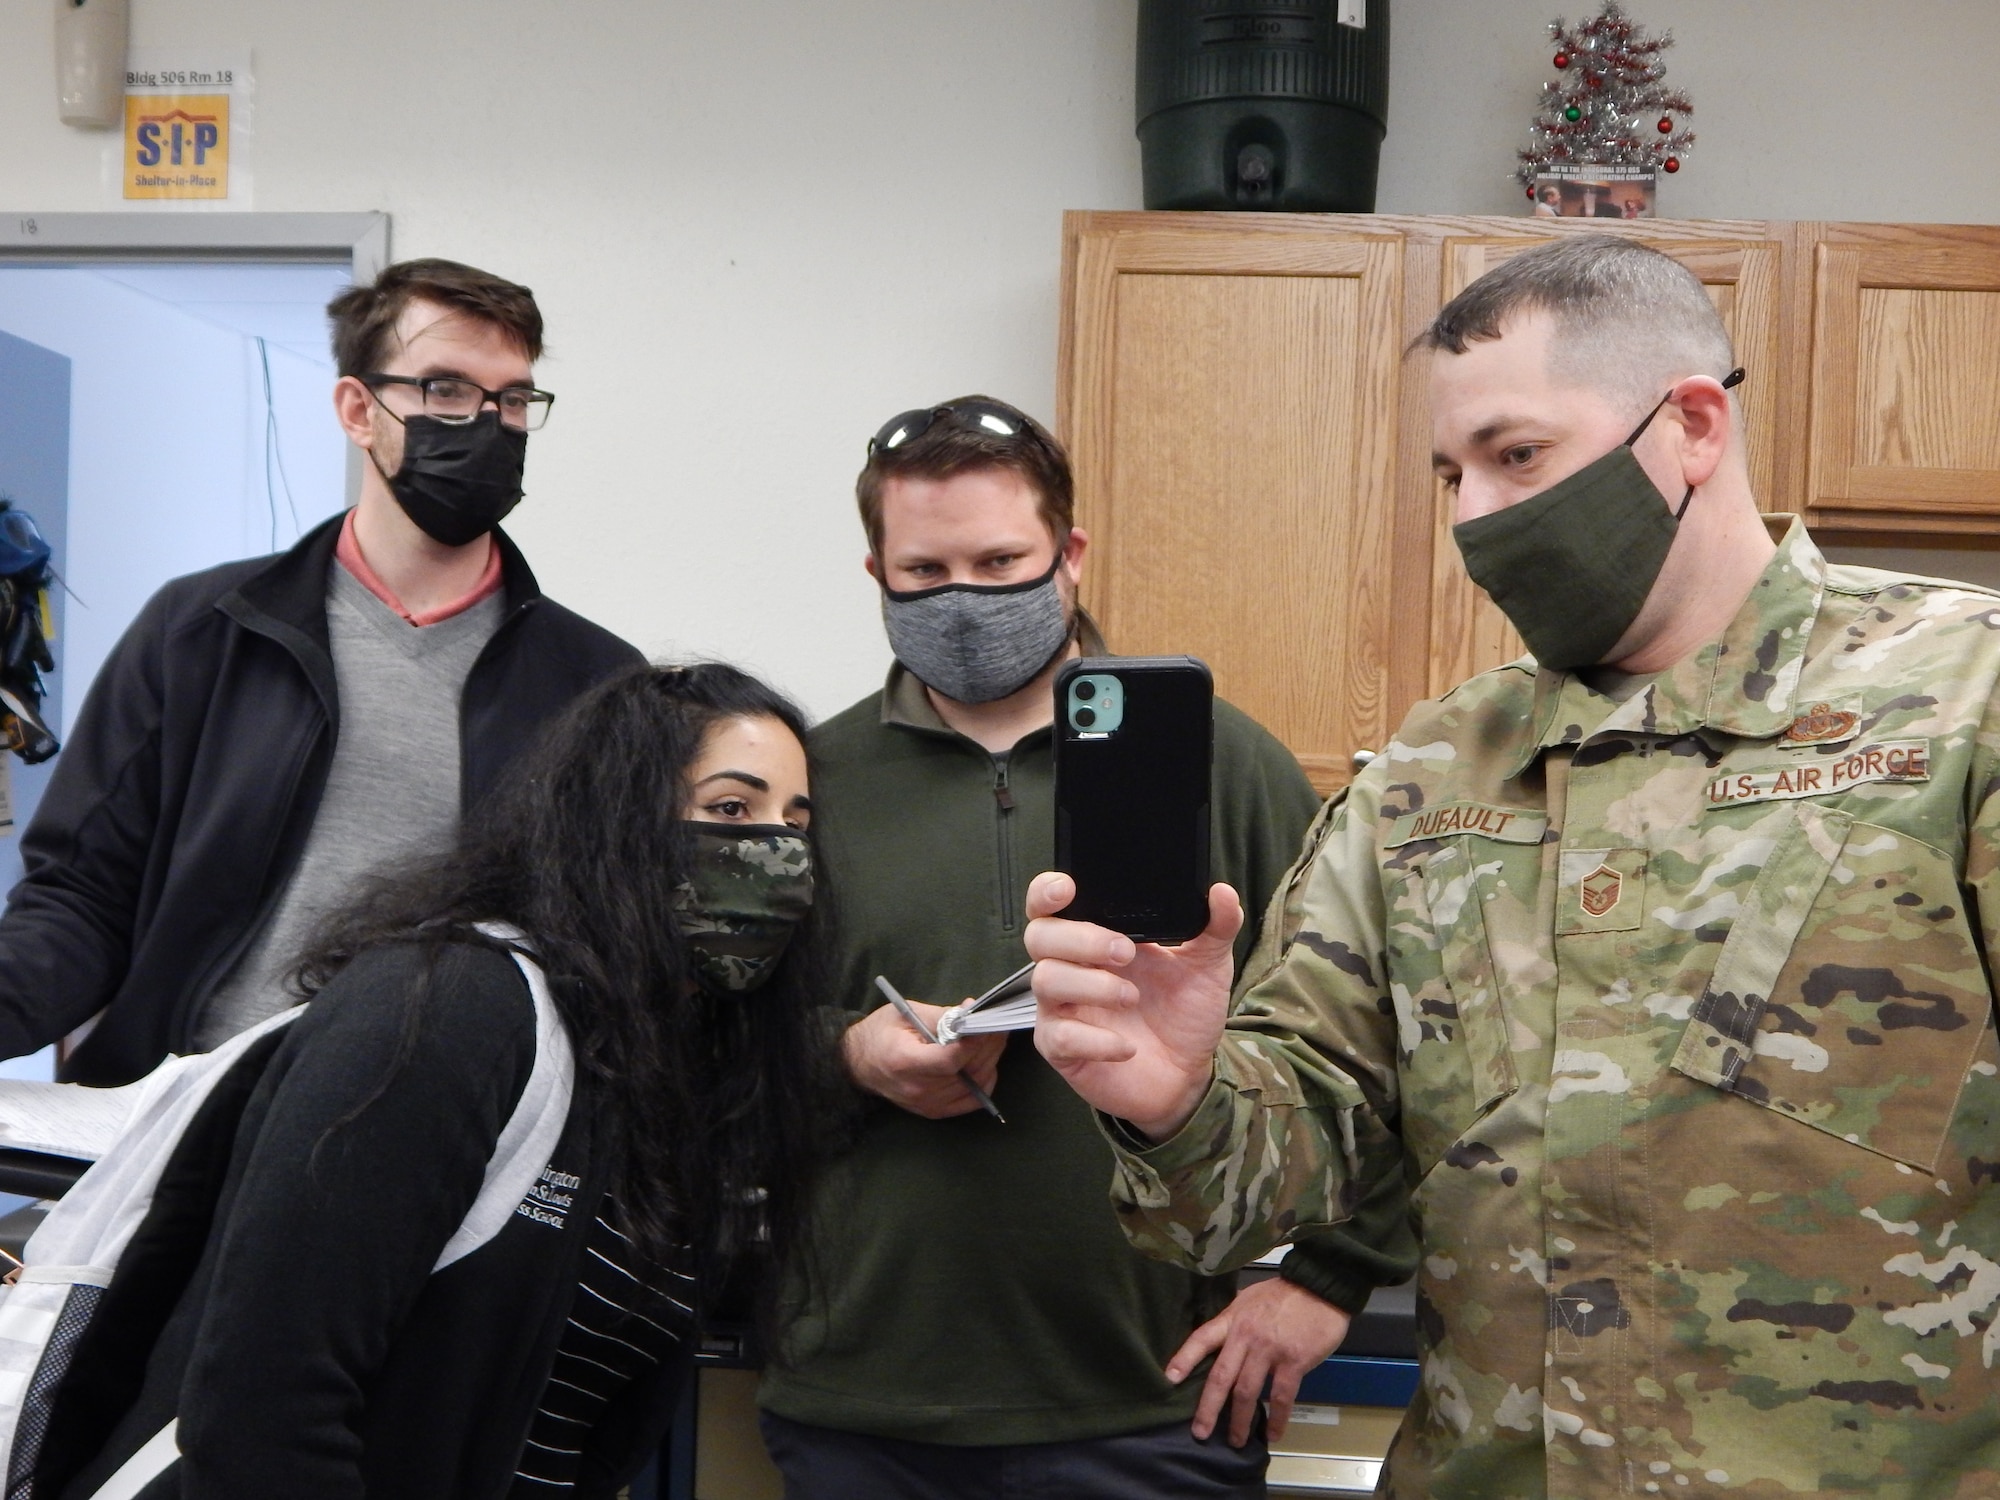 Master Sgt. Joseph Dufault, superintendent, Aircrew Flight Equipment, 375th Operations Support Squadron shows a video on his phone of the August 12, 2020, flooding of the AFE office to graduate students (left to right) Kyle Collier, Astha Bhatnagar, and Cam Loyet. The students are helping Scott’s Elevate innovation team to find potential solutions to prevent future flooding. (Photo by Christine Spargur)